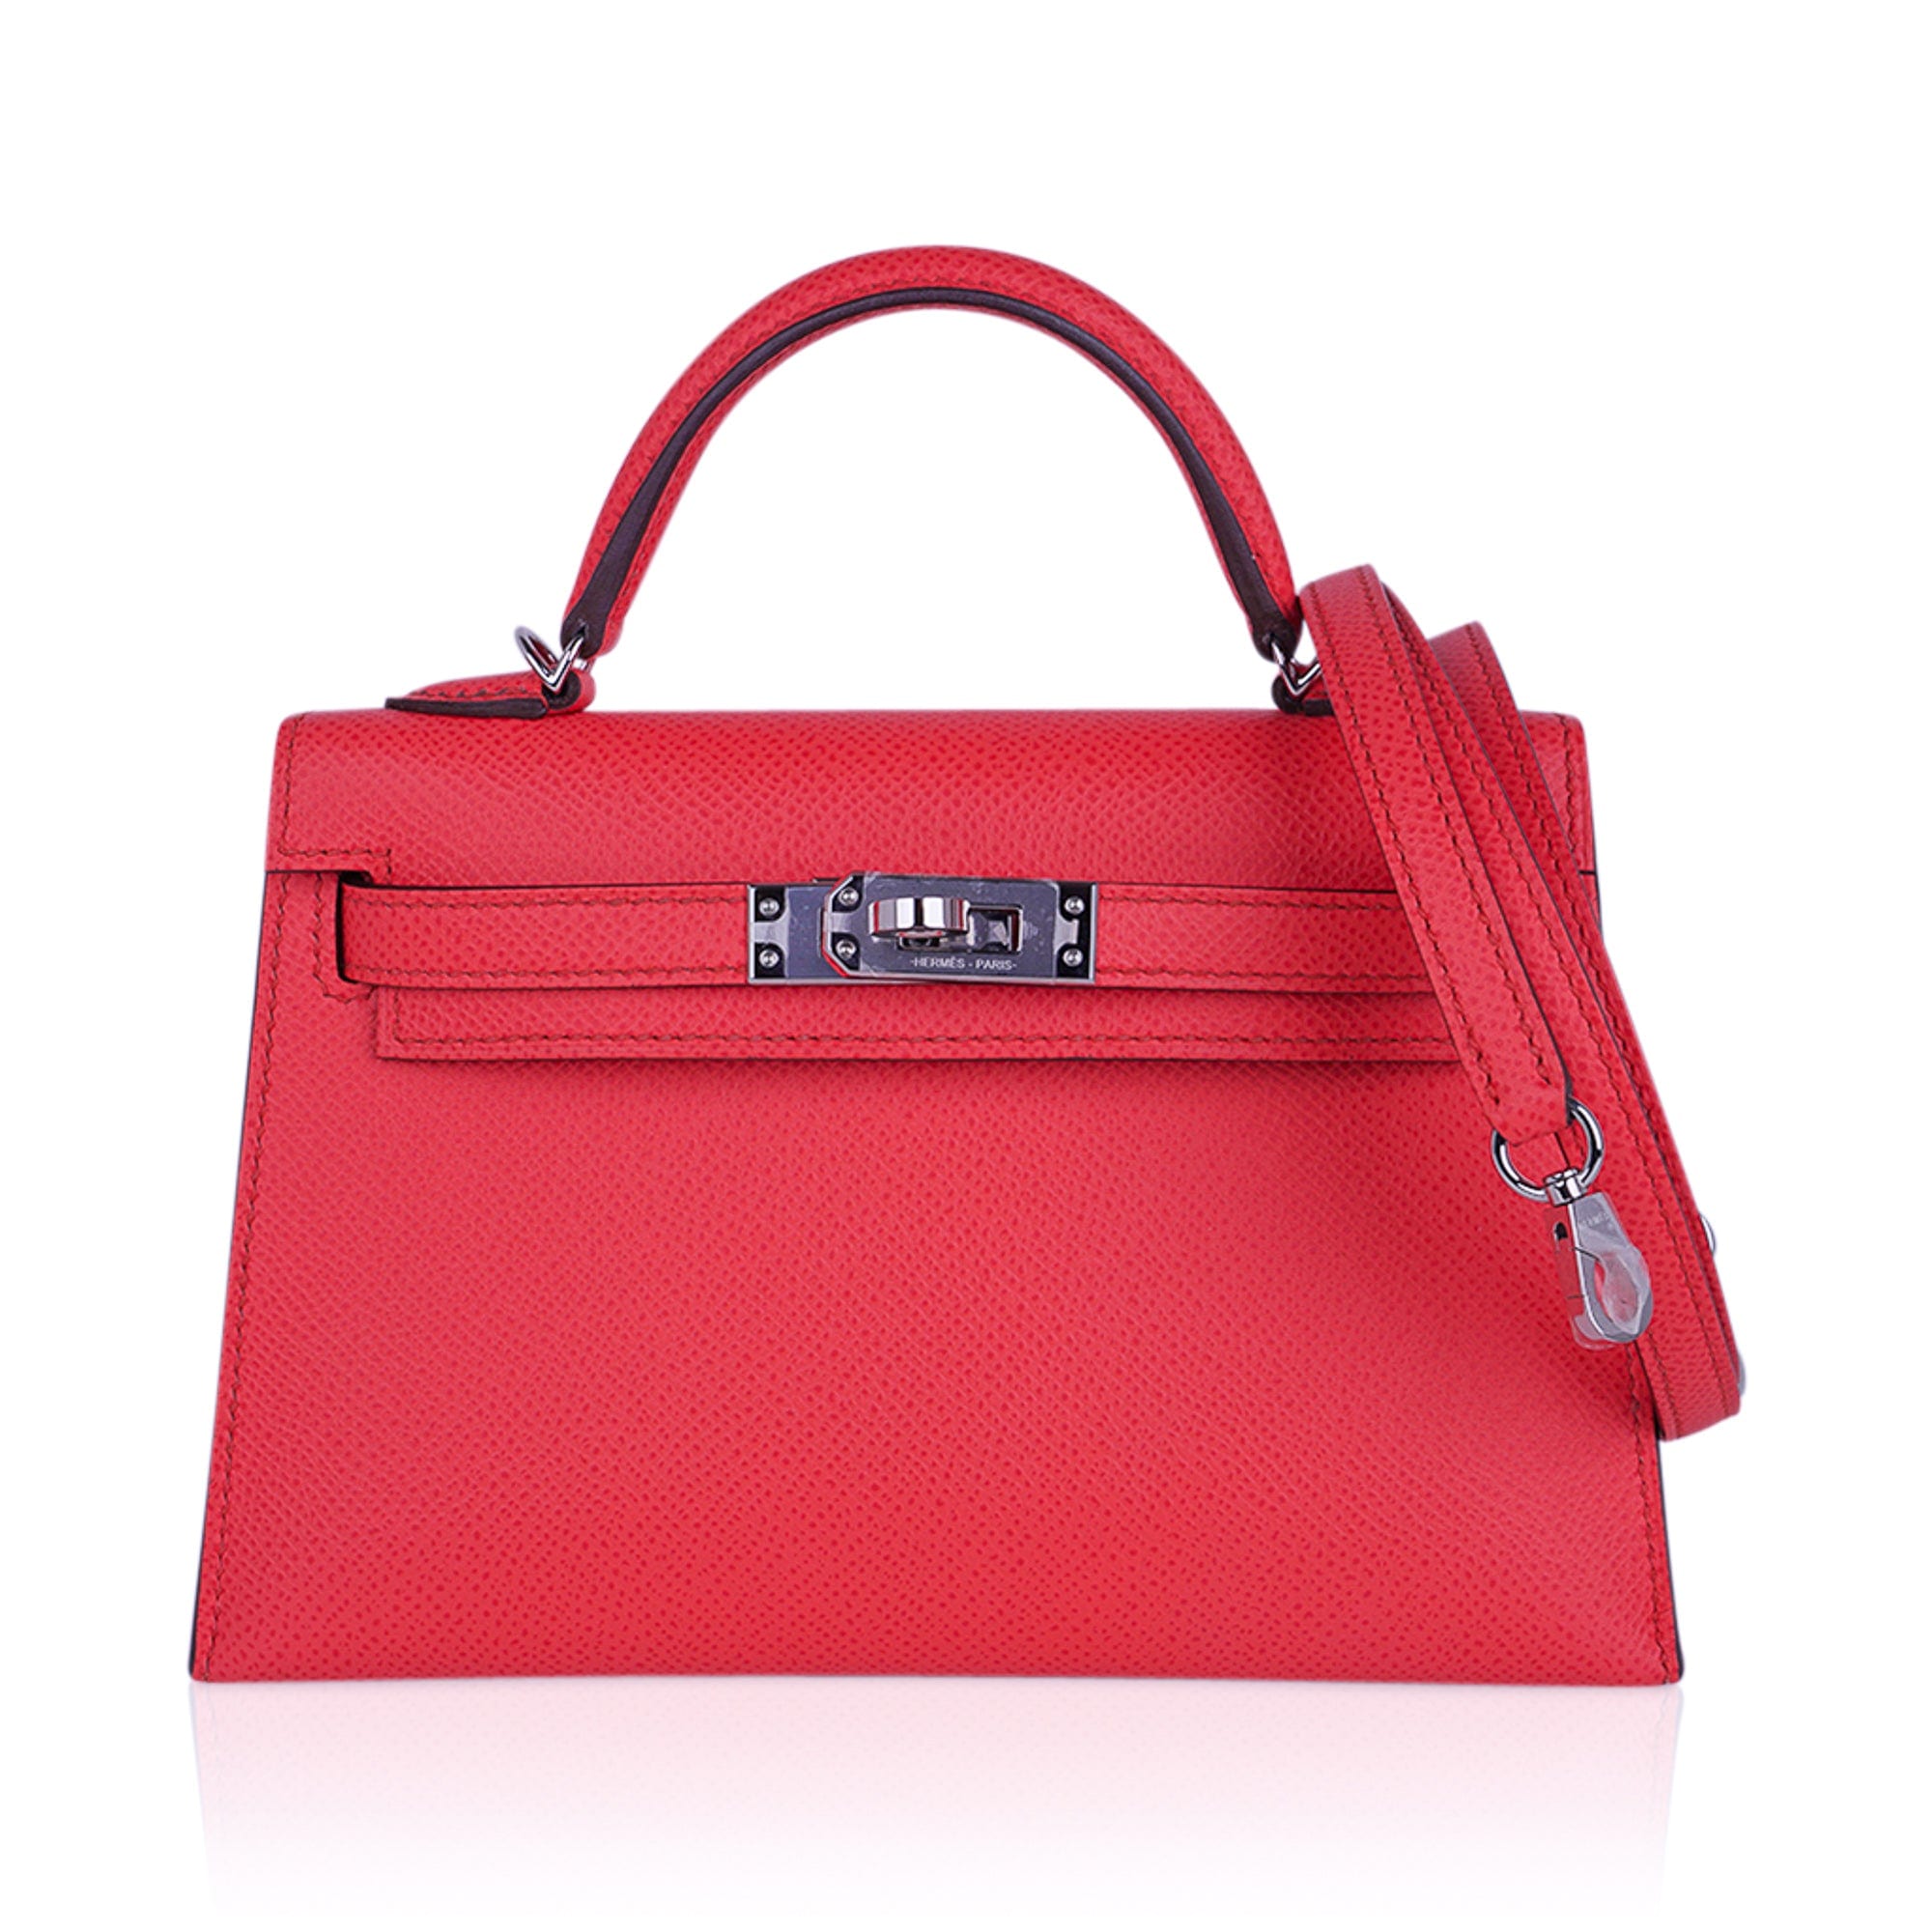 Original Hermes bags available In - RozyKlasic Collections